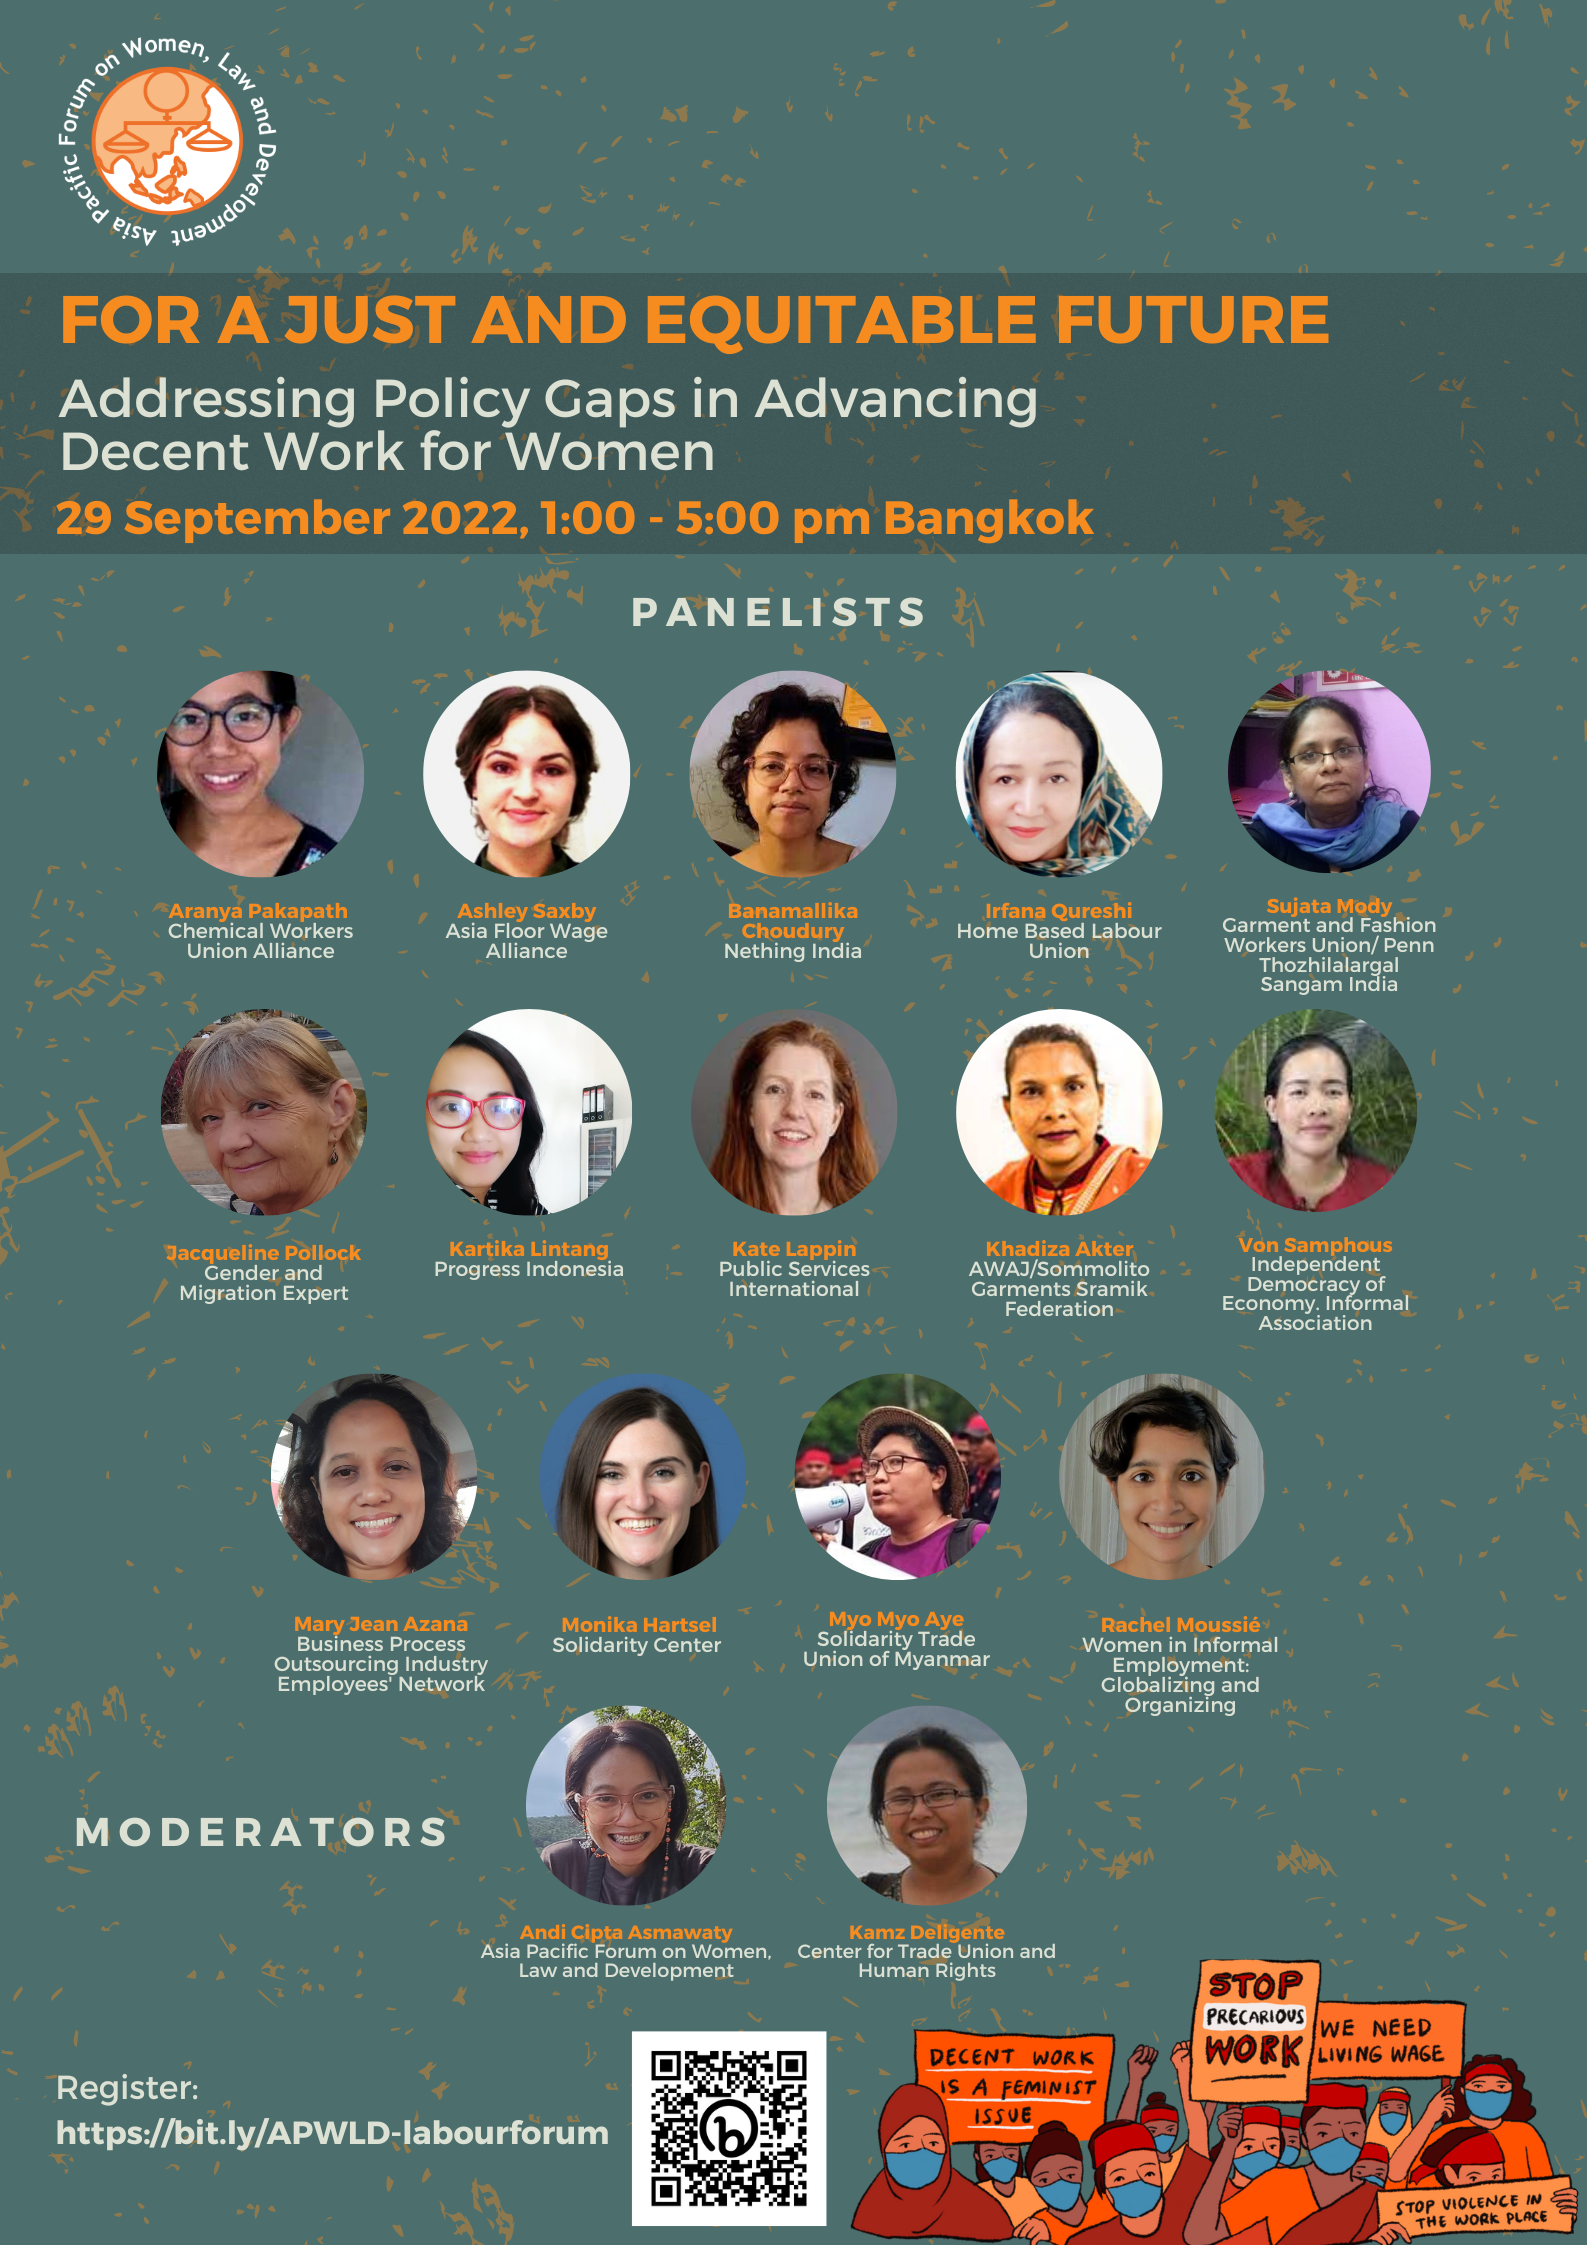 For a Just and Equitable Future: Addressing Policy Gaps in Advancing Decent Work for Women